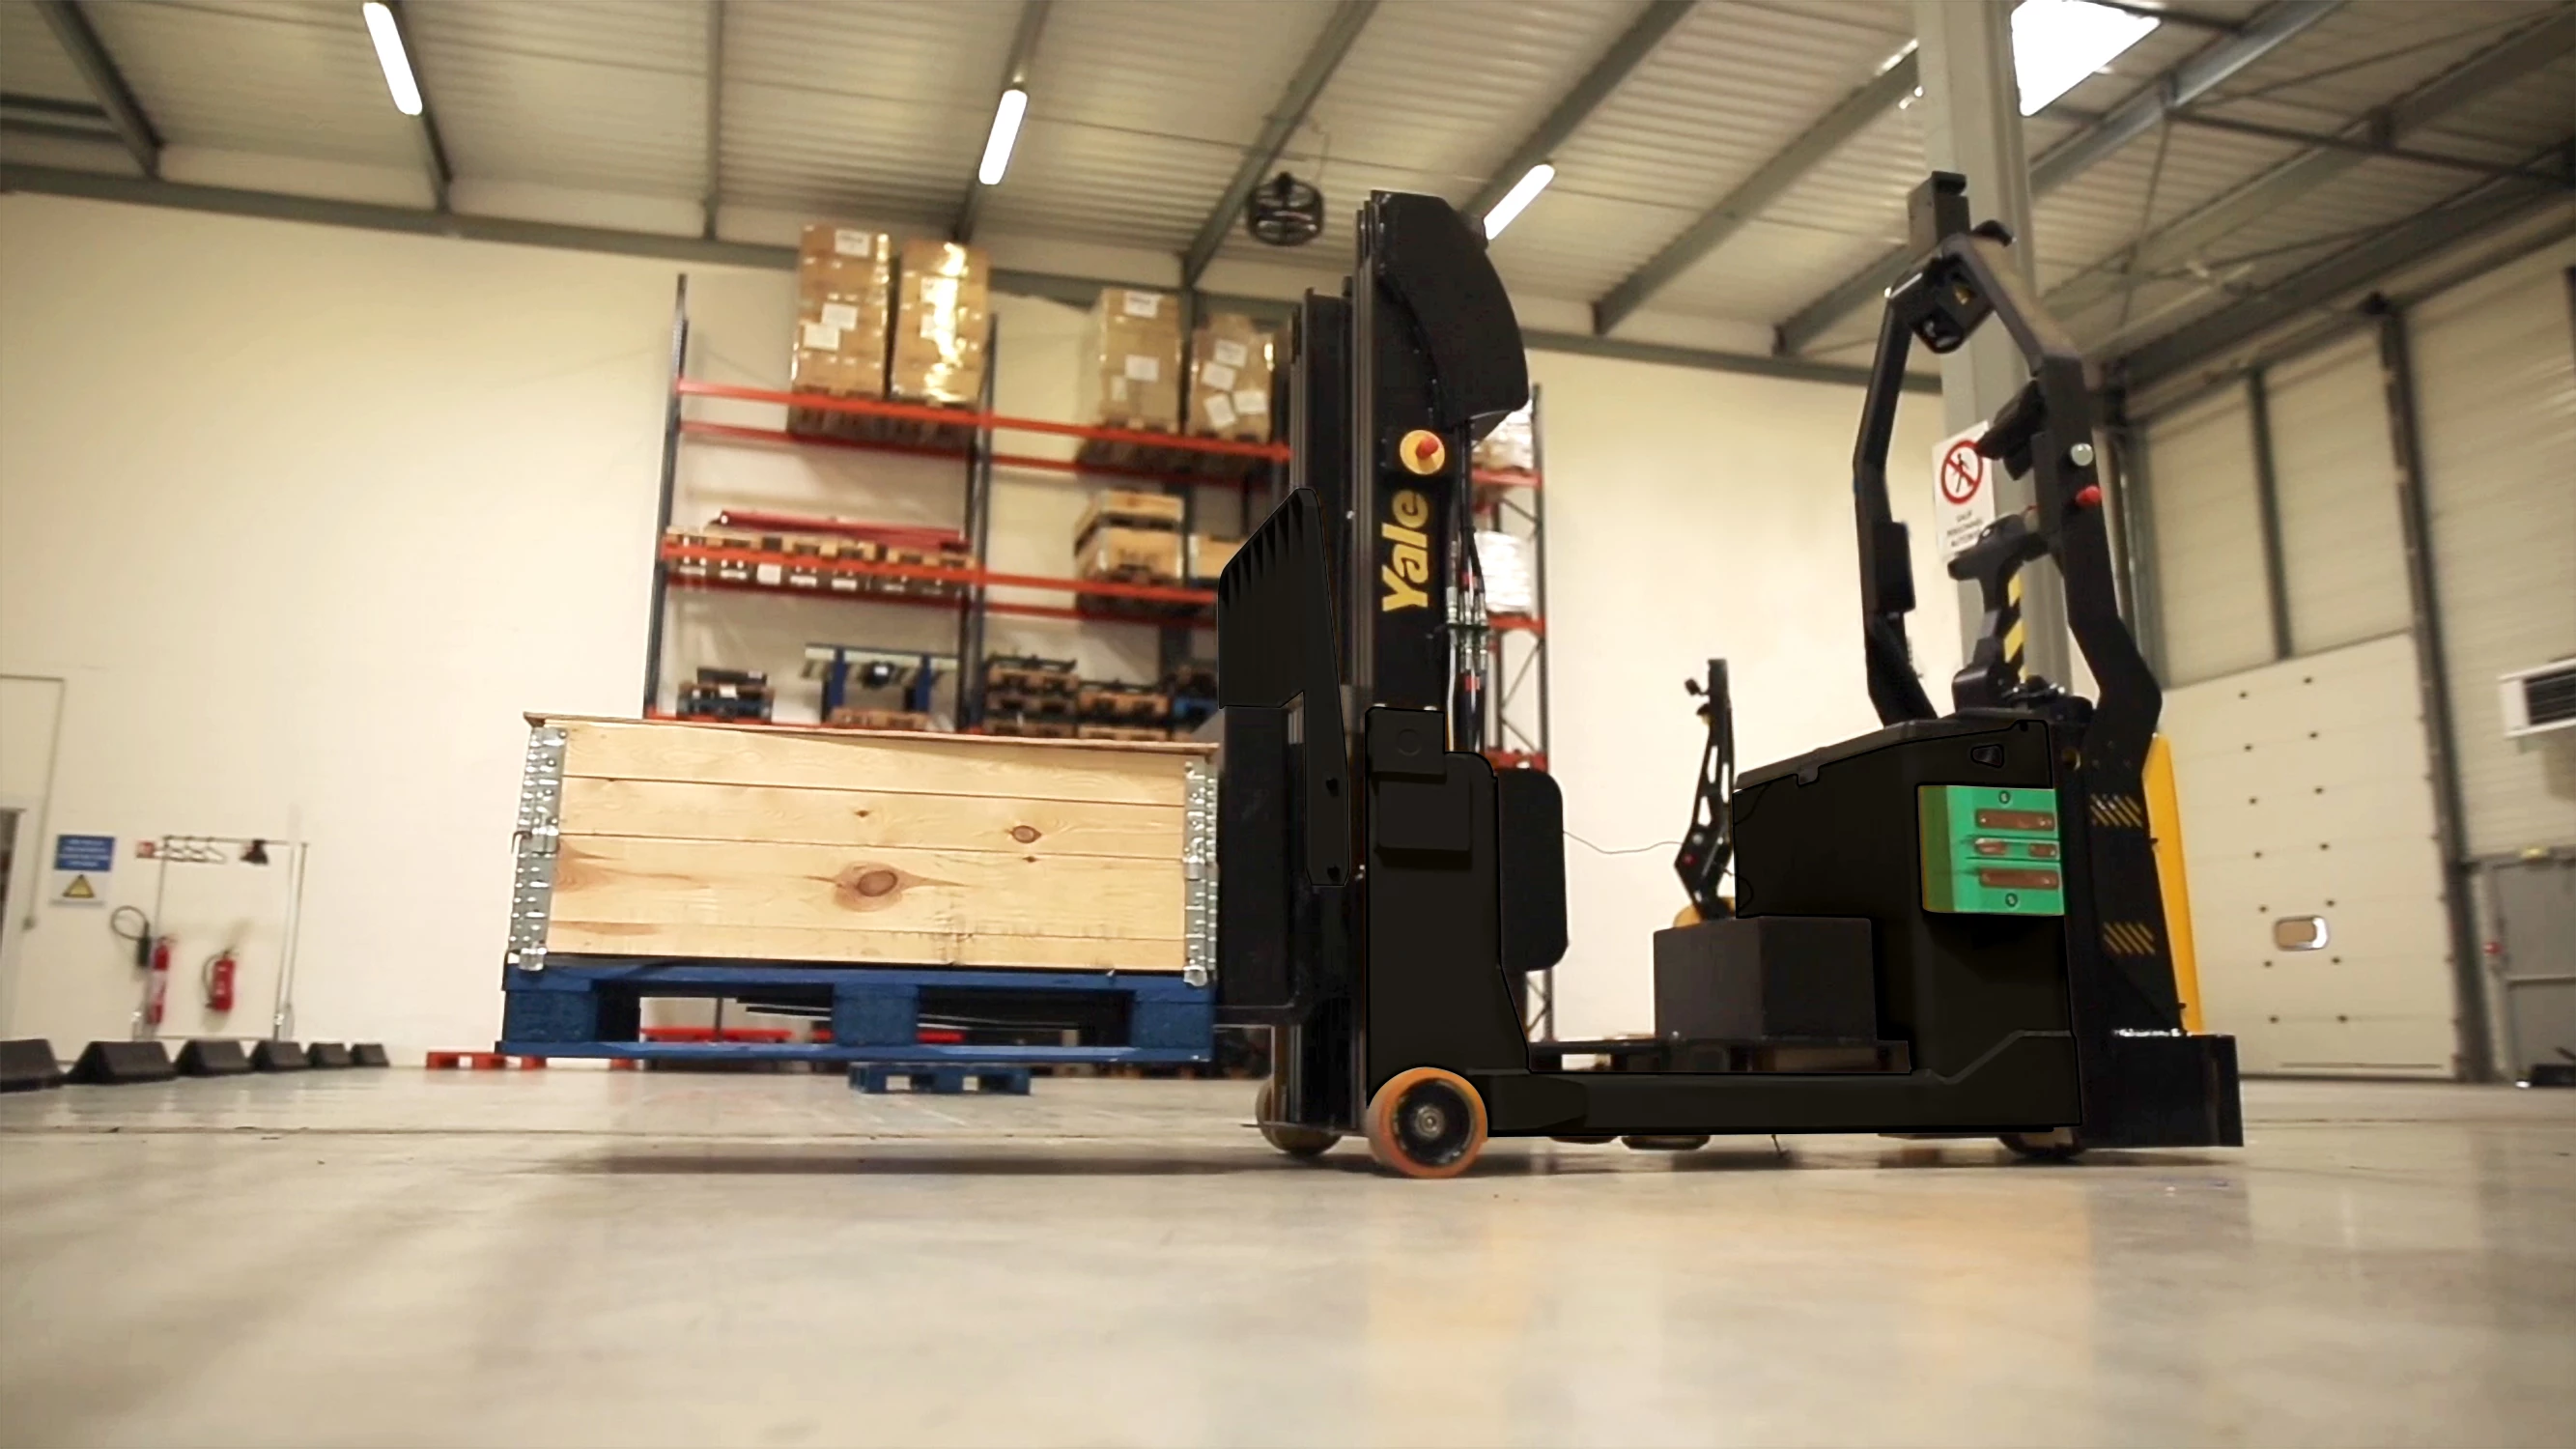 View from the ground of a Yale robotic counterbalanced stacker carrying a pallet